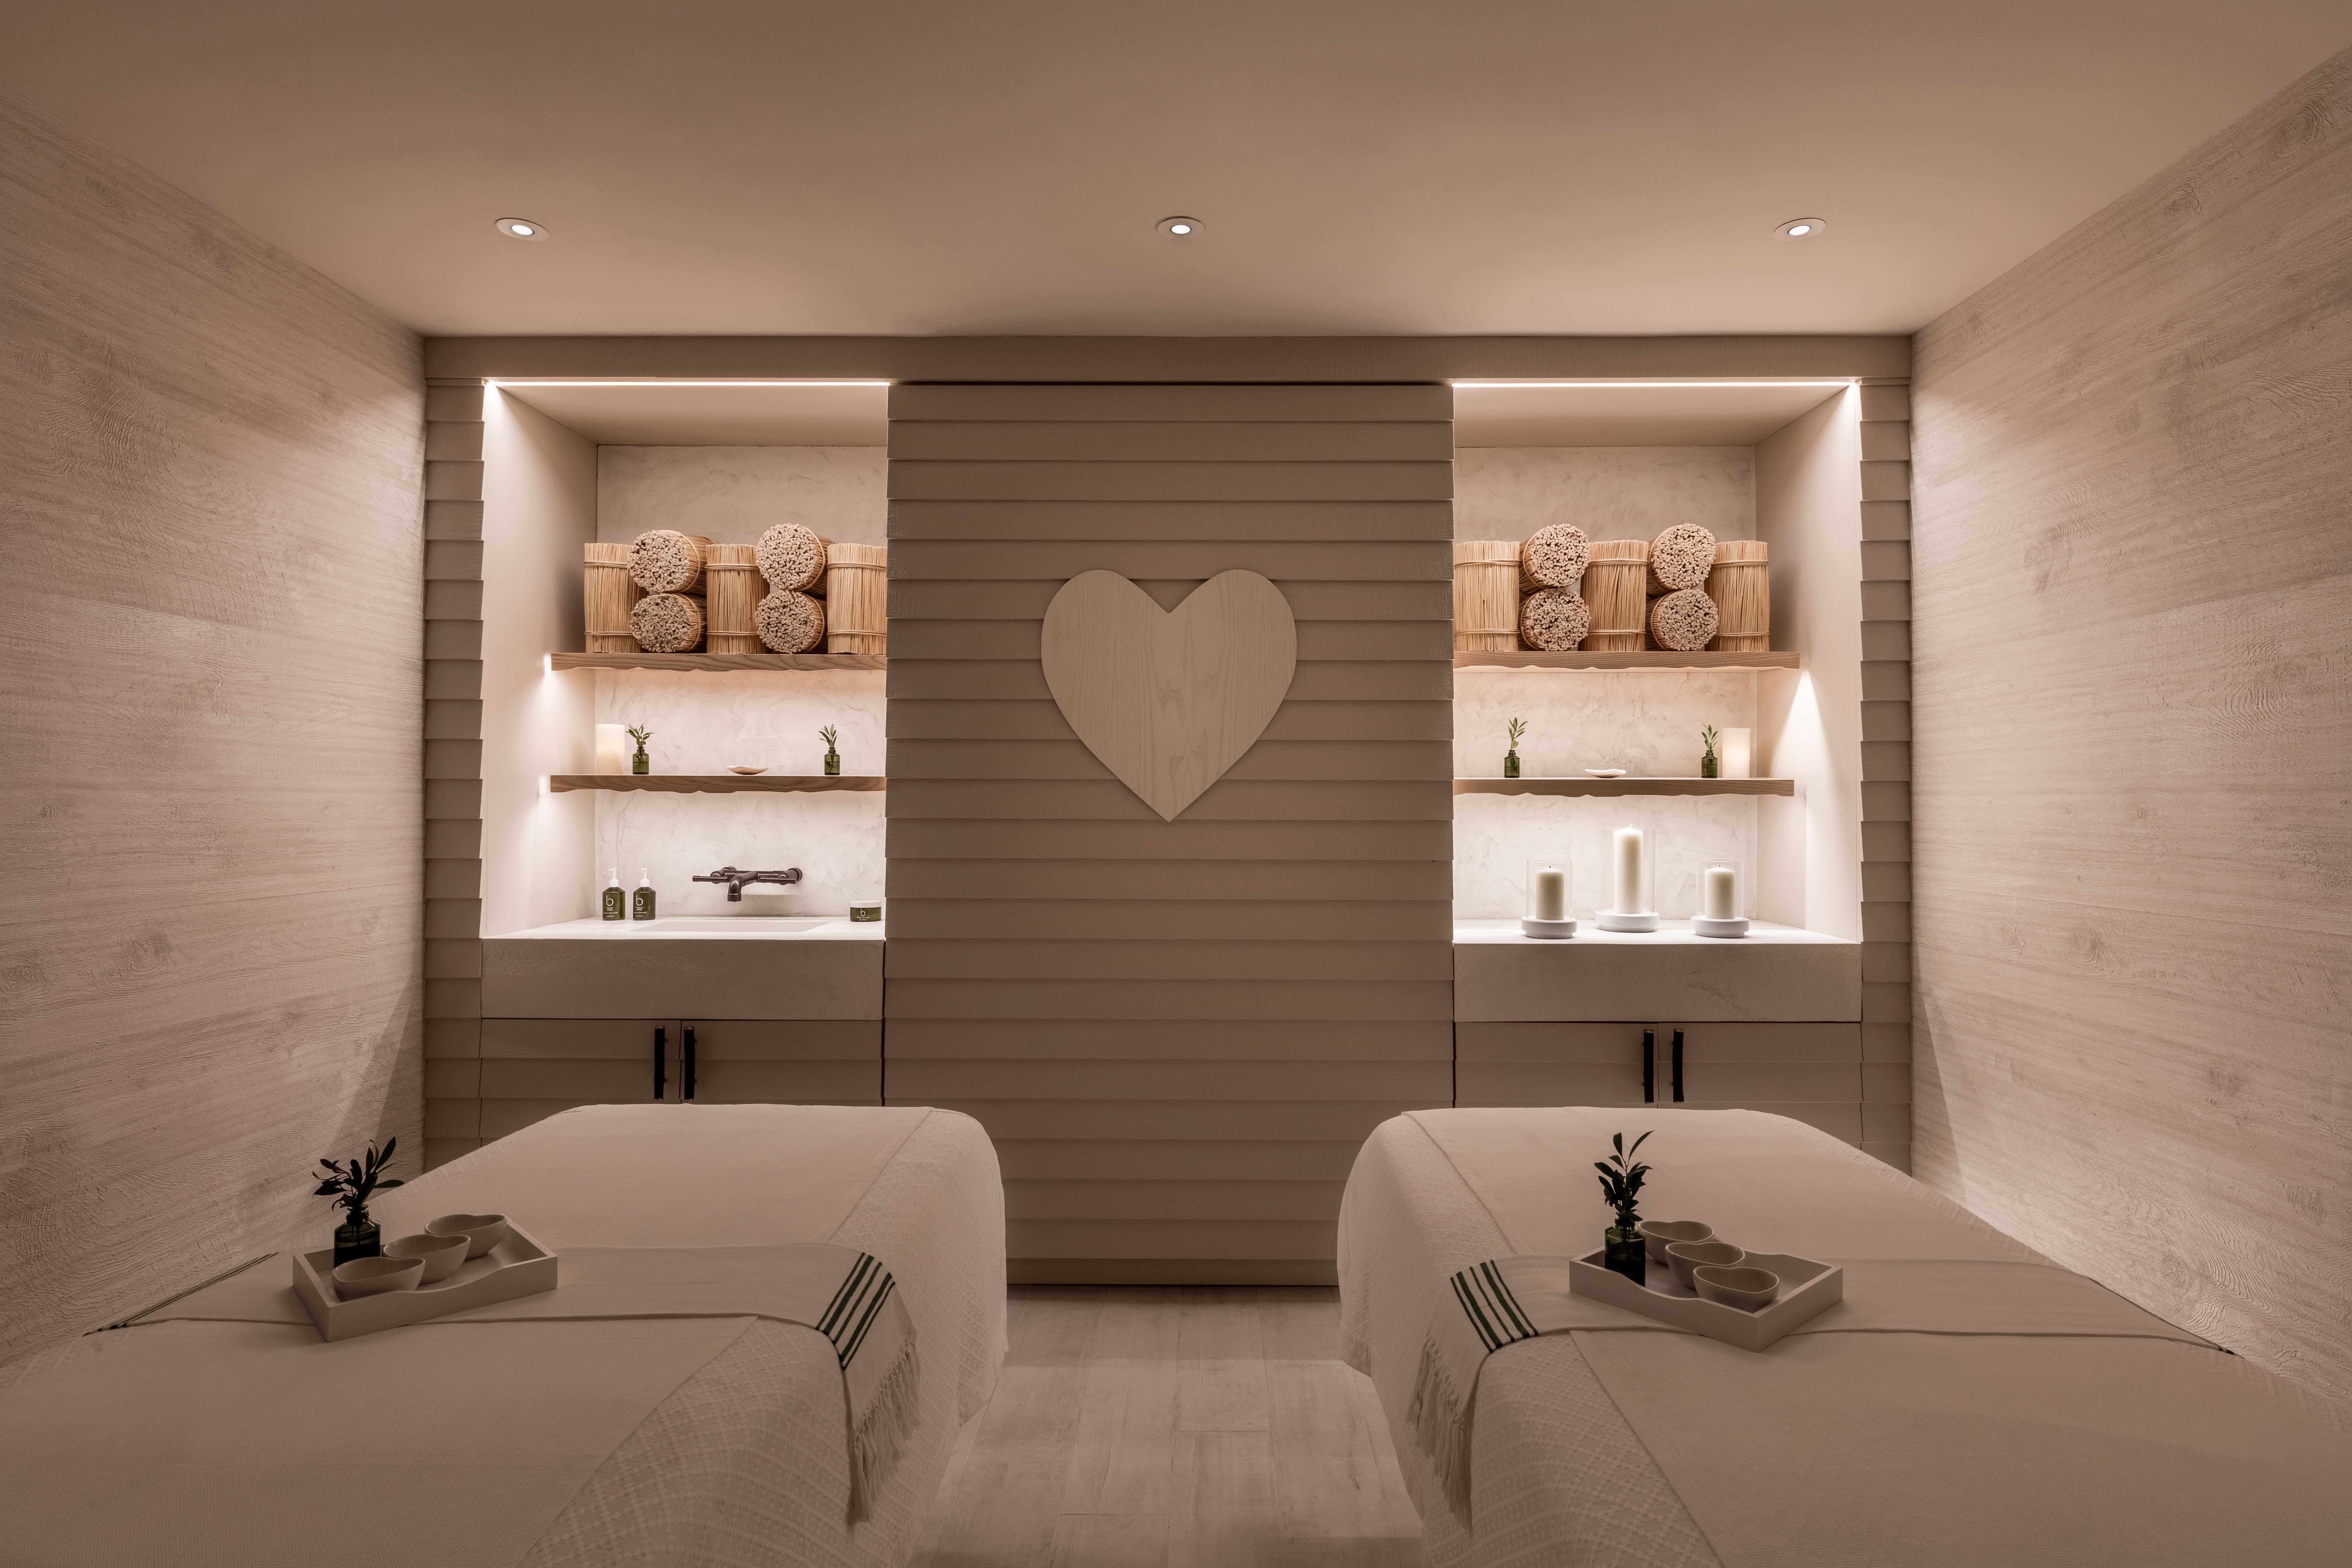 10 Best NYC Spas - Top Spa Treatments in New York City